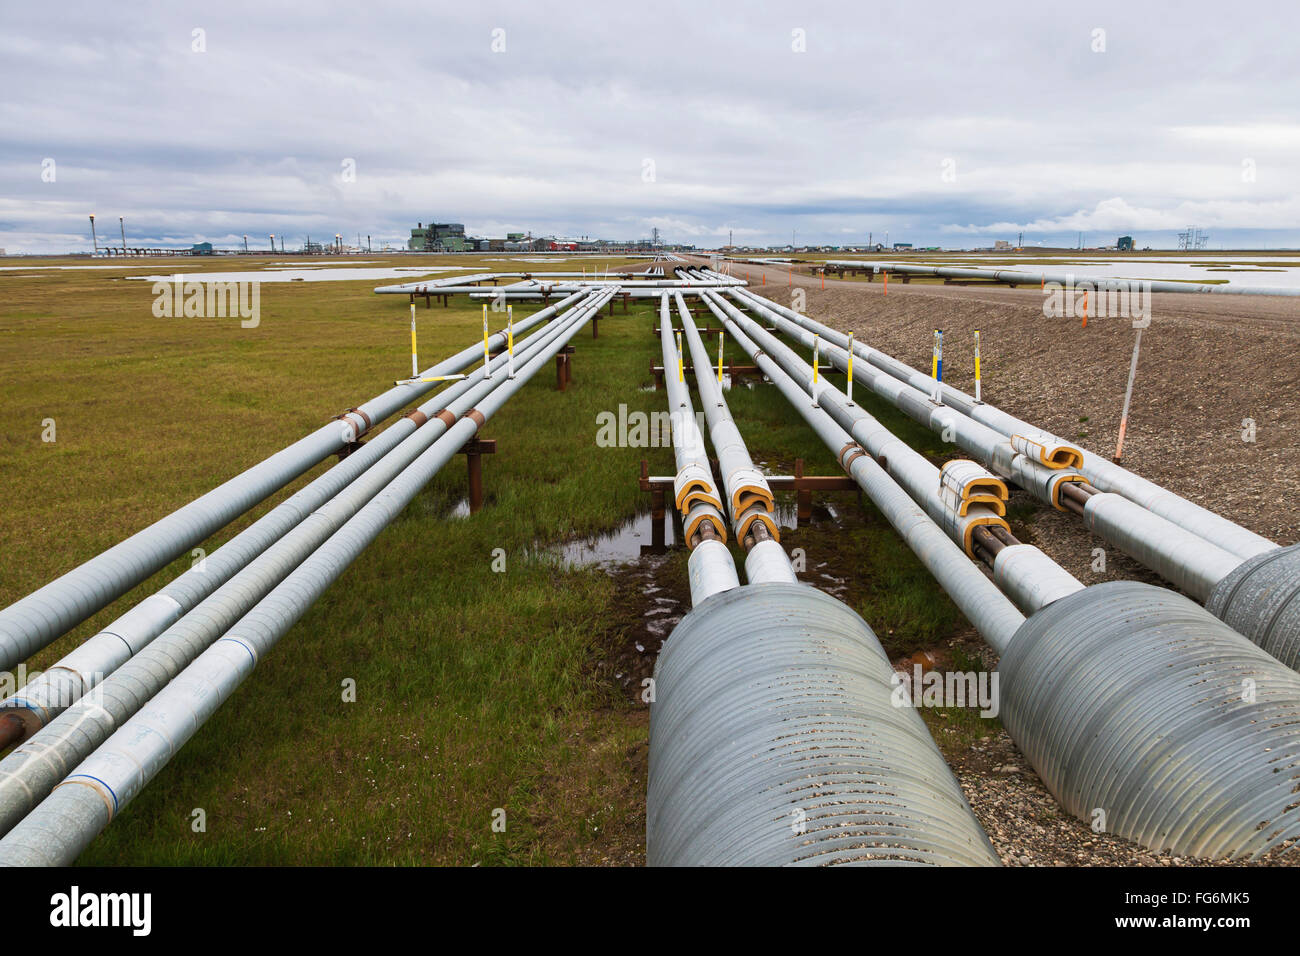 Oil pipelines with Gathering Center 1 (GC1) in the Prudhoe Bay Oil Field, North Slope,  Arctic Alaska, Summer Stock Photo